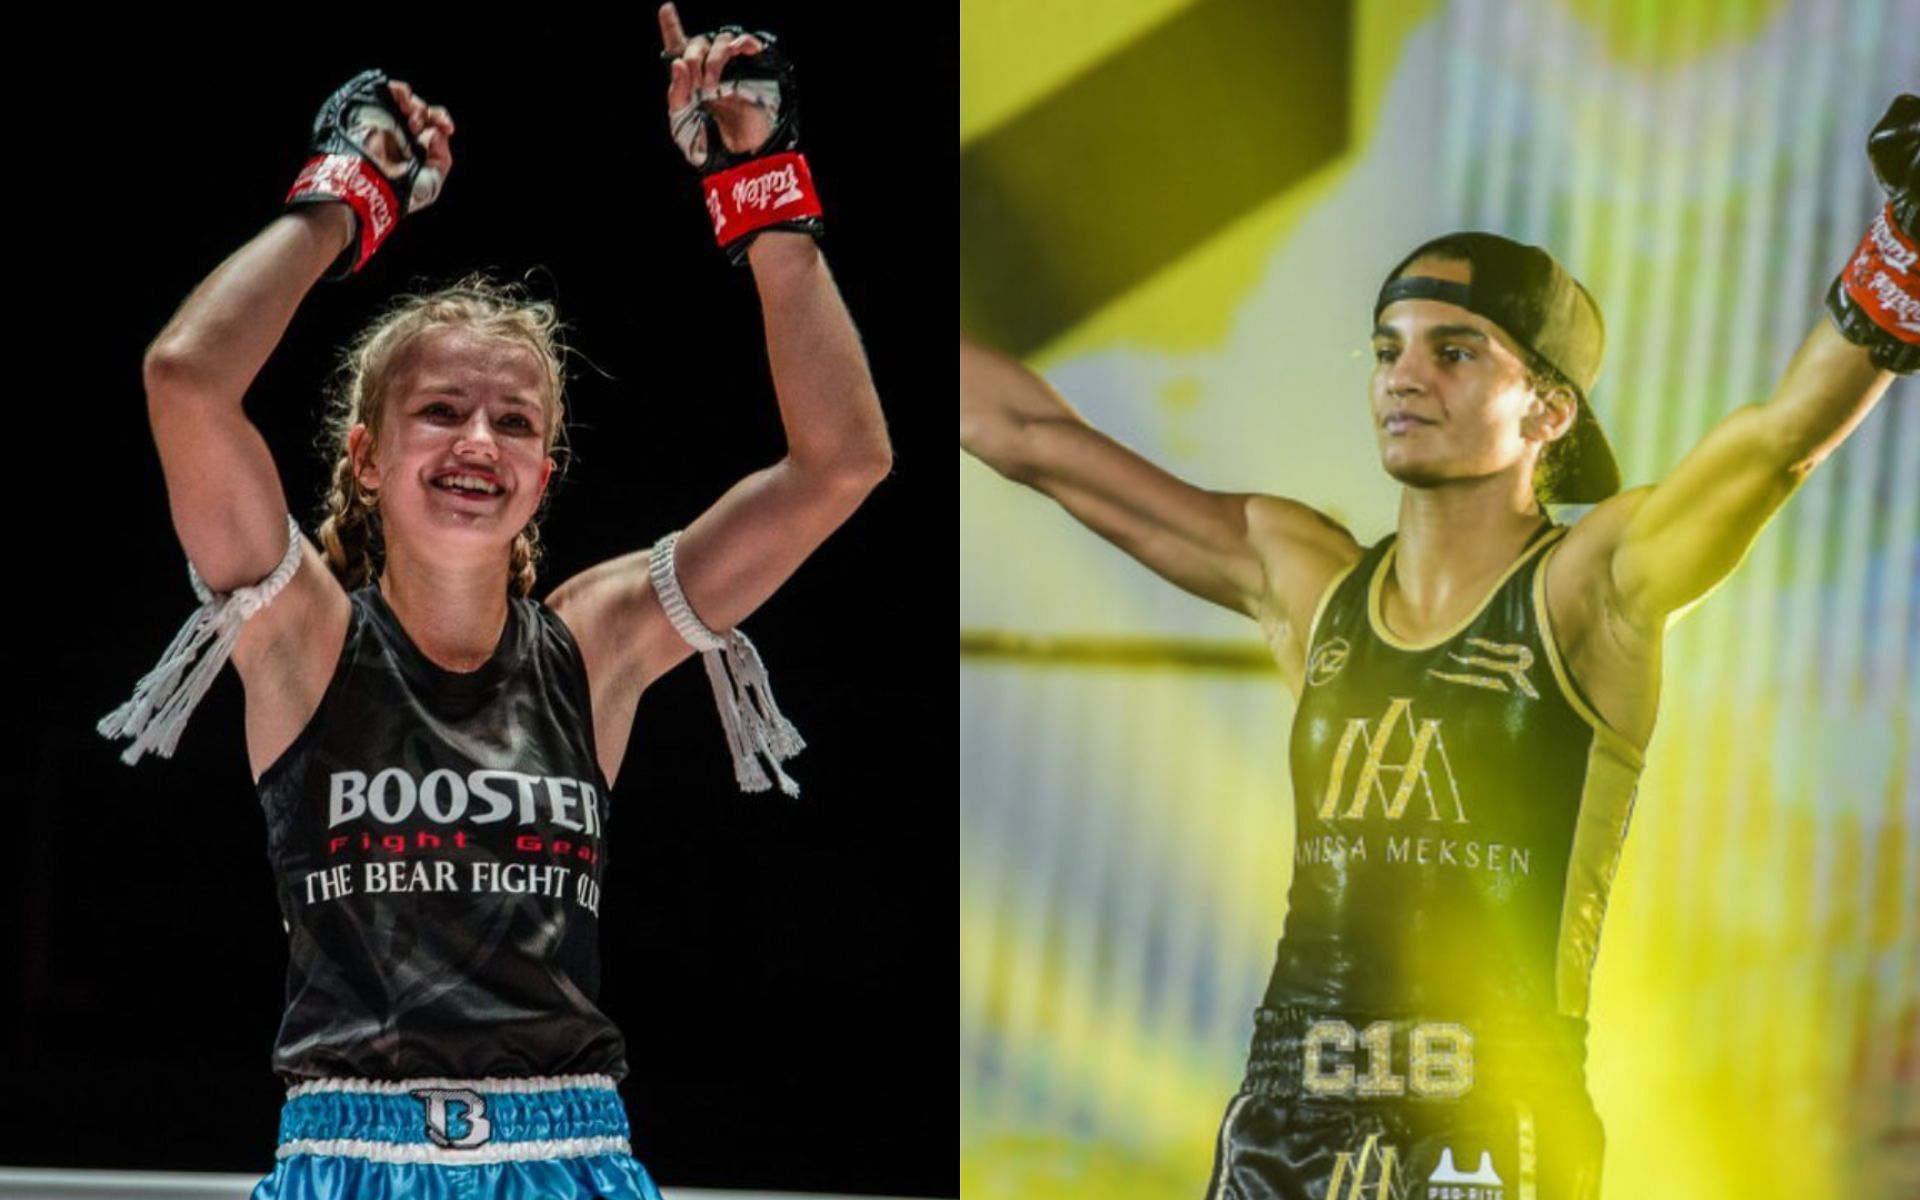 Anissa Meksen (right) plans to knock Marie Ruumet (left) out in the first round of their Muay Thai fight at ONE: Eersel vs. Sadikovic [Photos: ONE Championship]